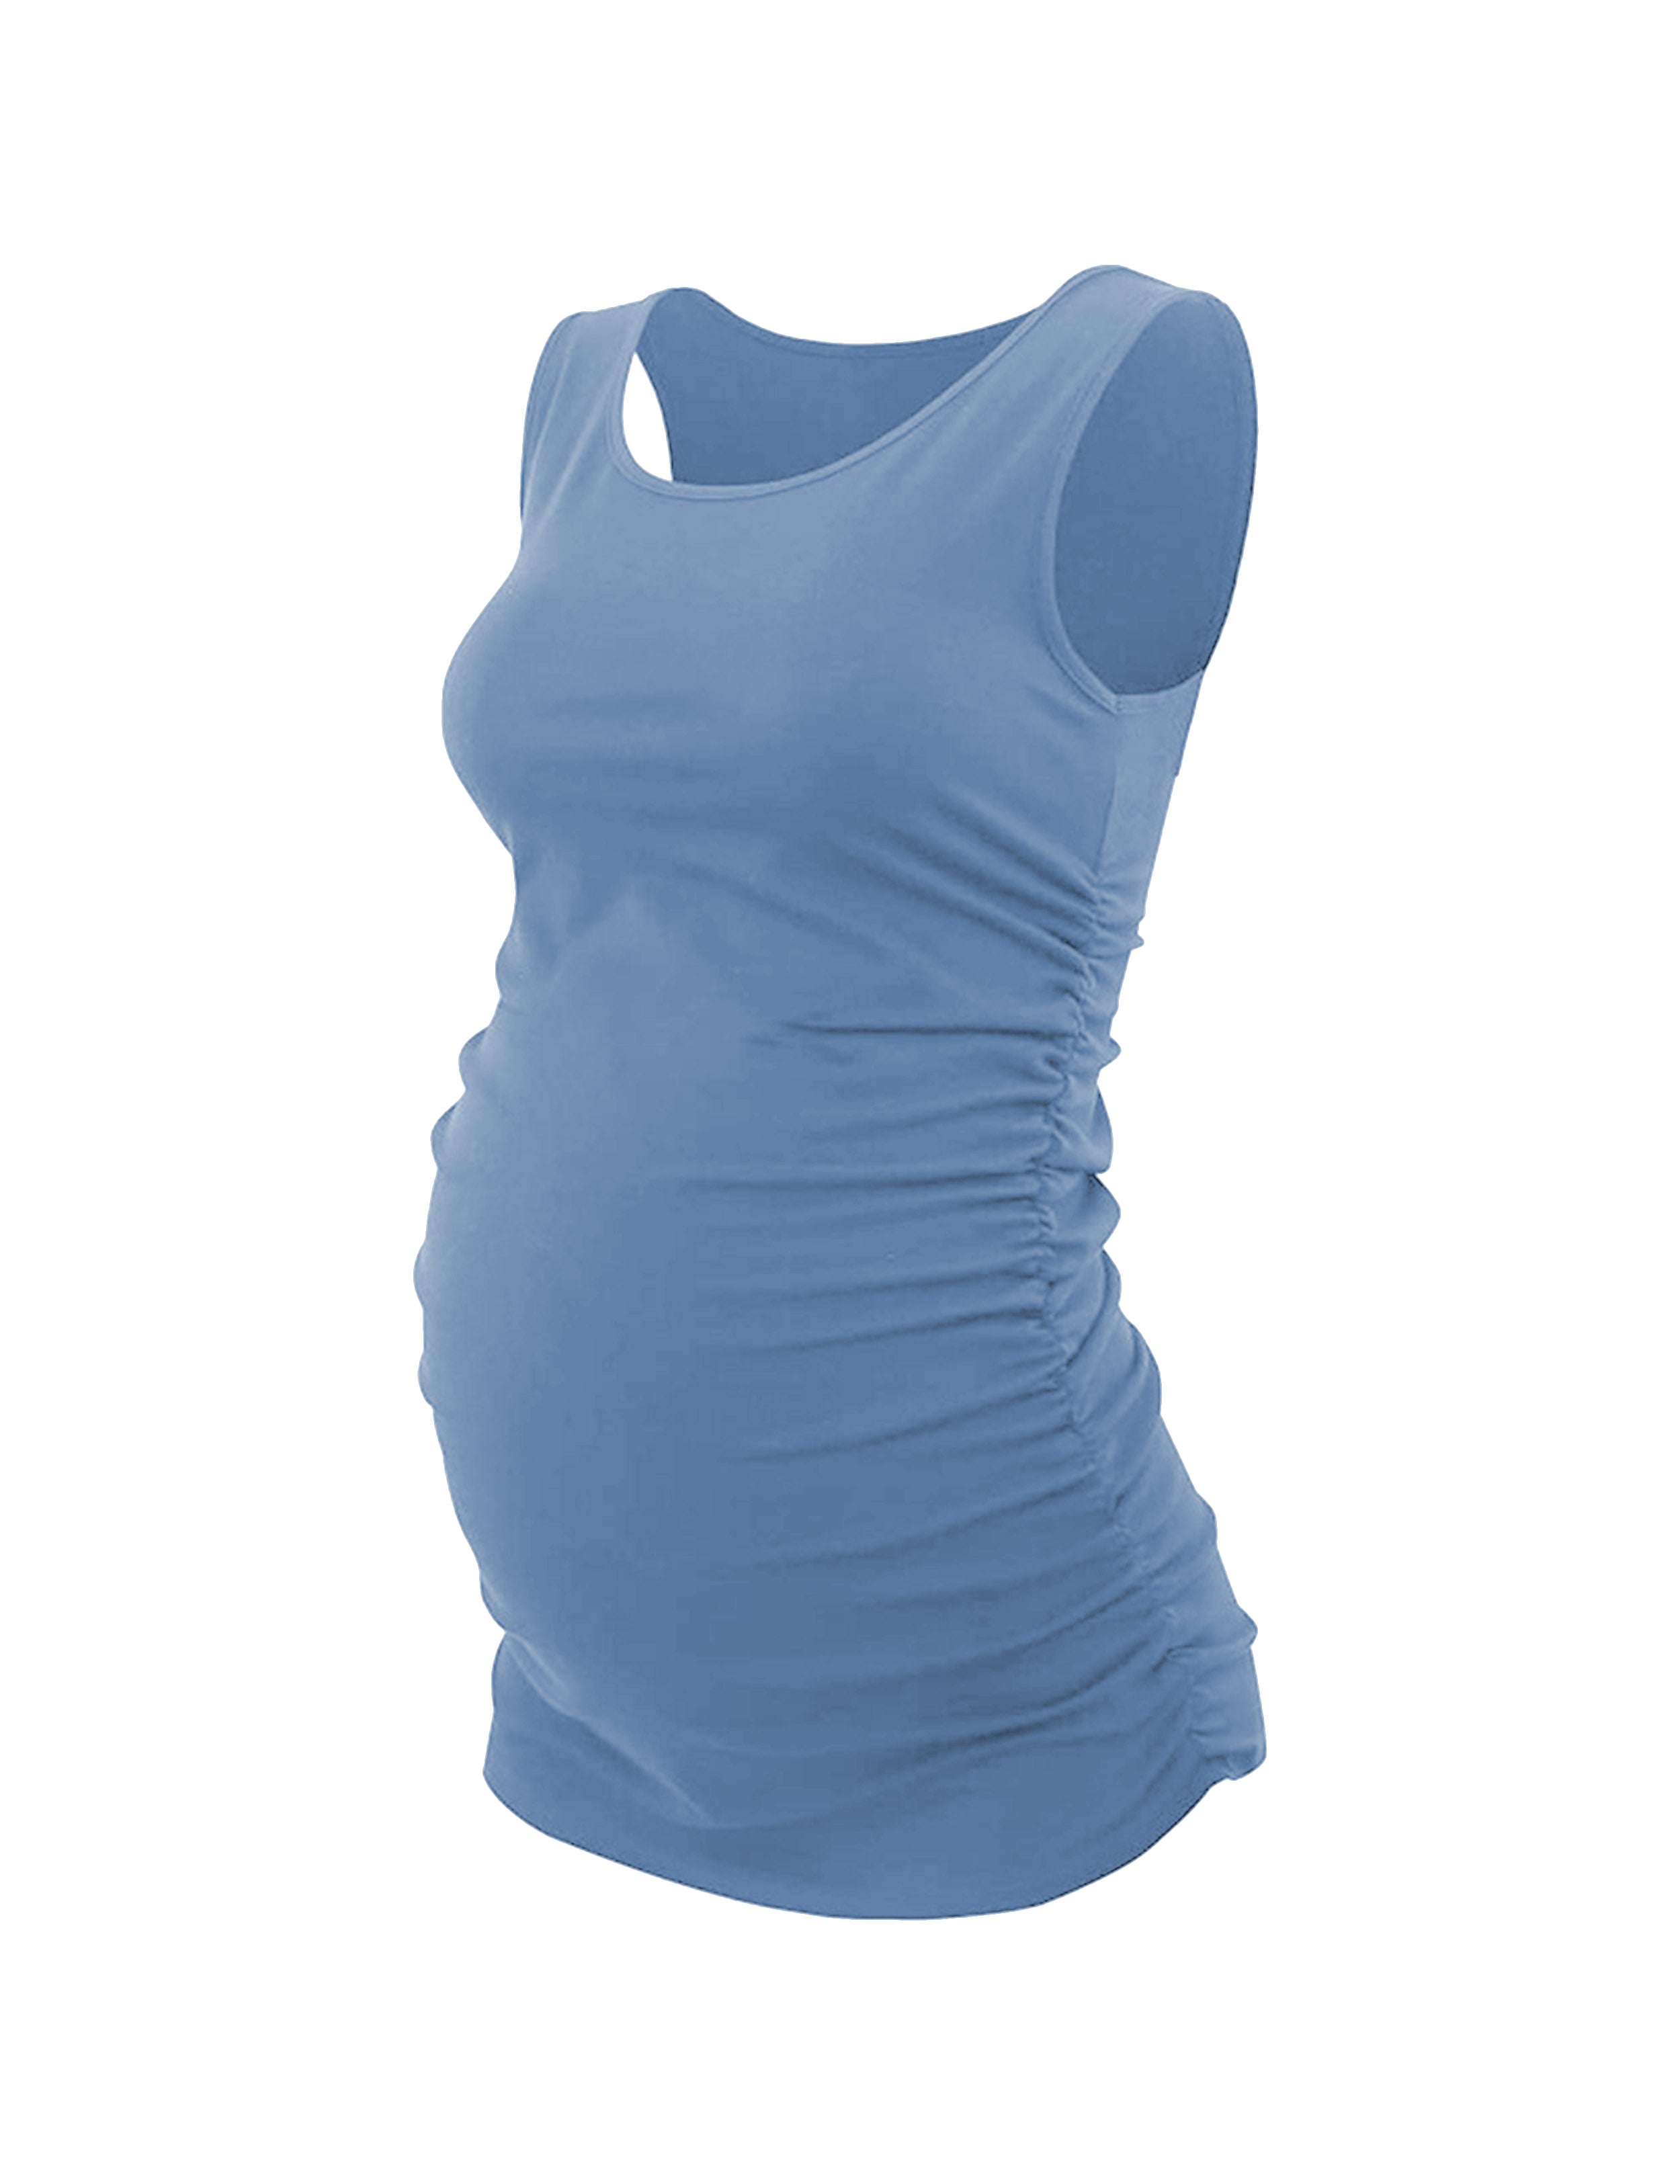 Maternity Side Shirred Tank Top electricblue 92%Nylon/8%Spandex(Cotton Soft) Designed for Maternity So buttery soft, it feels weightless Sweat-wicking Four-way stretch Breathable Contours your body